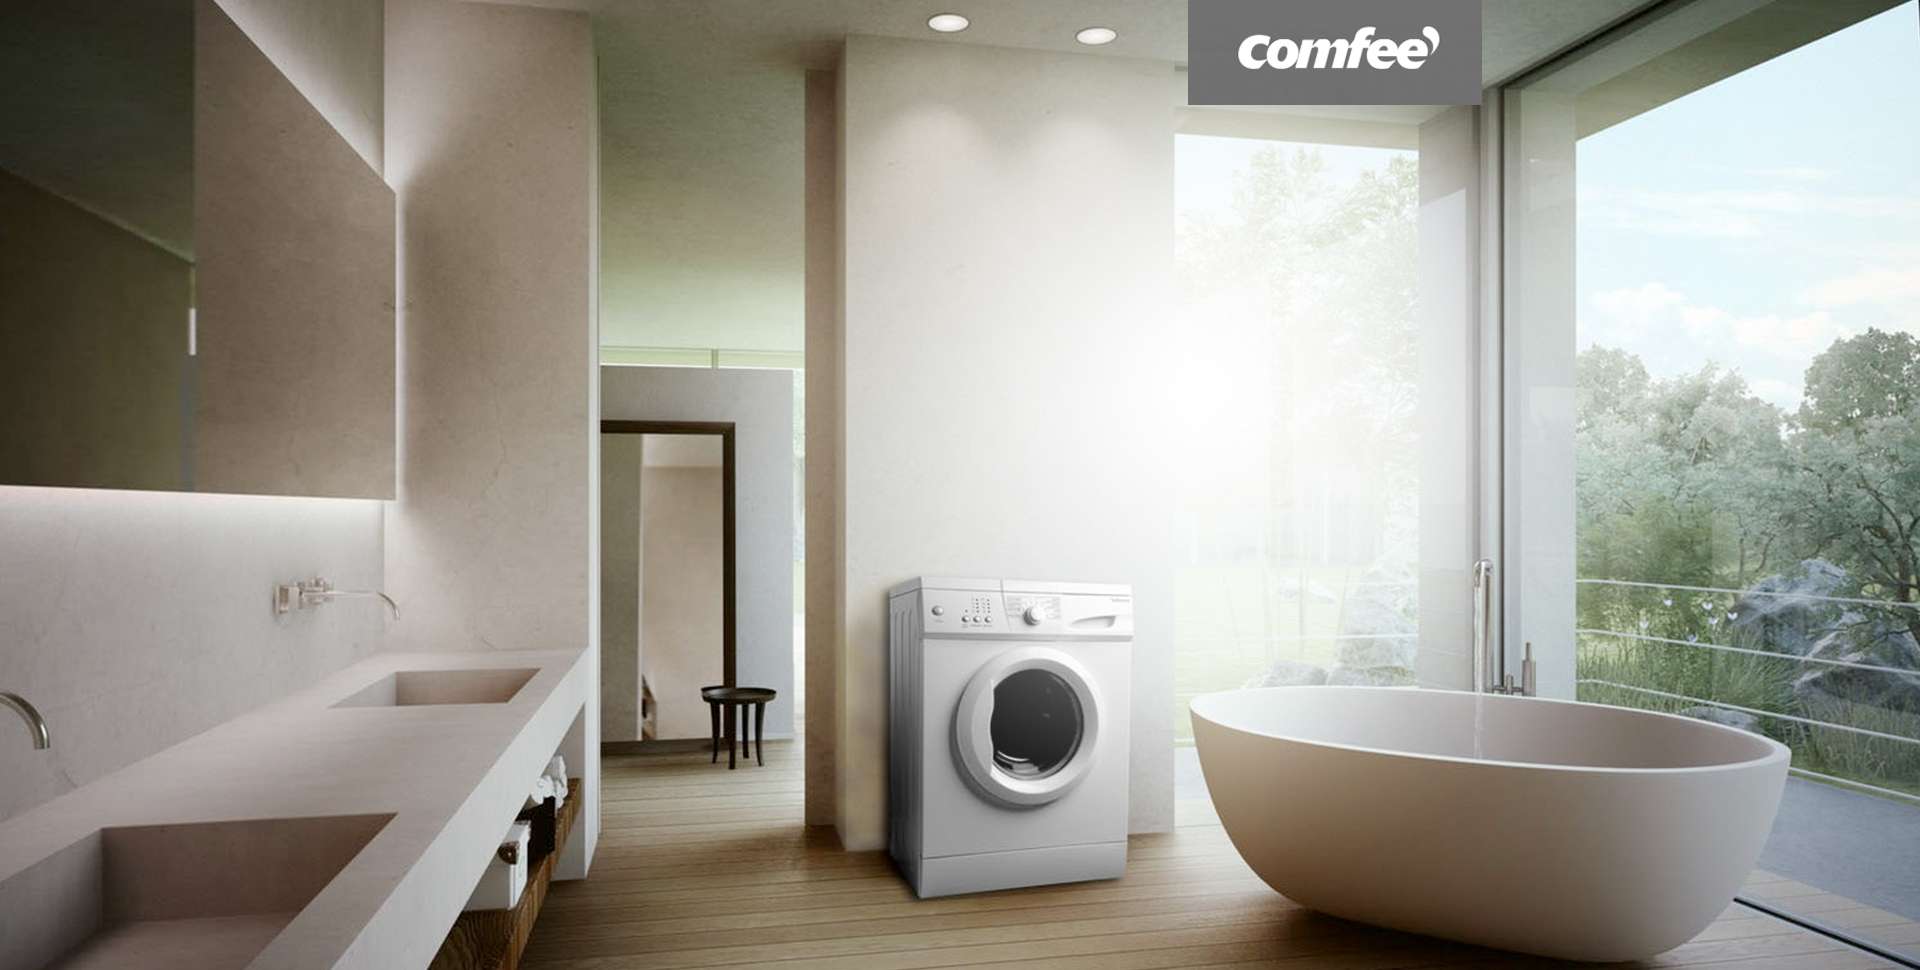 Comfee Home Appliances  Our Businesses - Midea Group